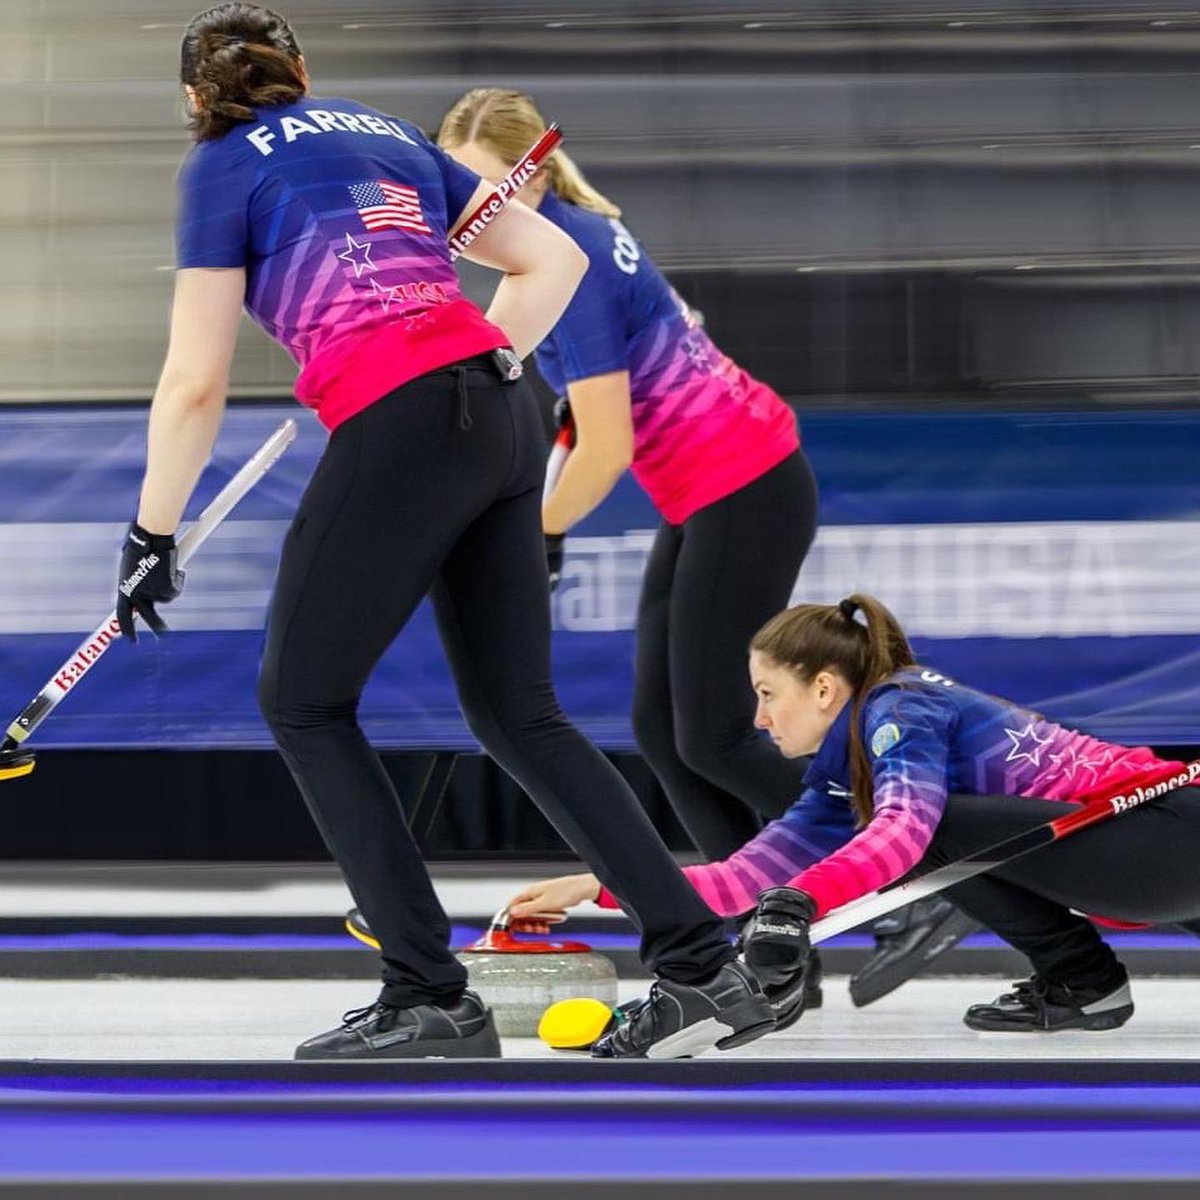 (2/2) Huge thank you to @usacurl and @Omaha_Sport for an event we’ll remember for a lifetime! And we wouldn't be able to chase our dreams without our amazing sponsors so thank you @DavesteVineyard @OROROwear @McKeeTravel @BalancePlus_ @AthletesForHope @thetrainingHAUS